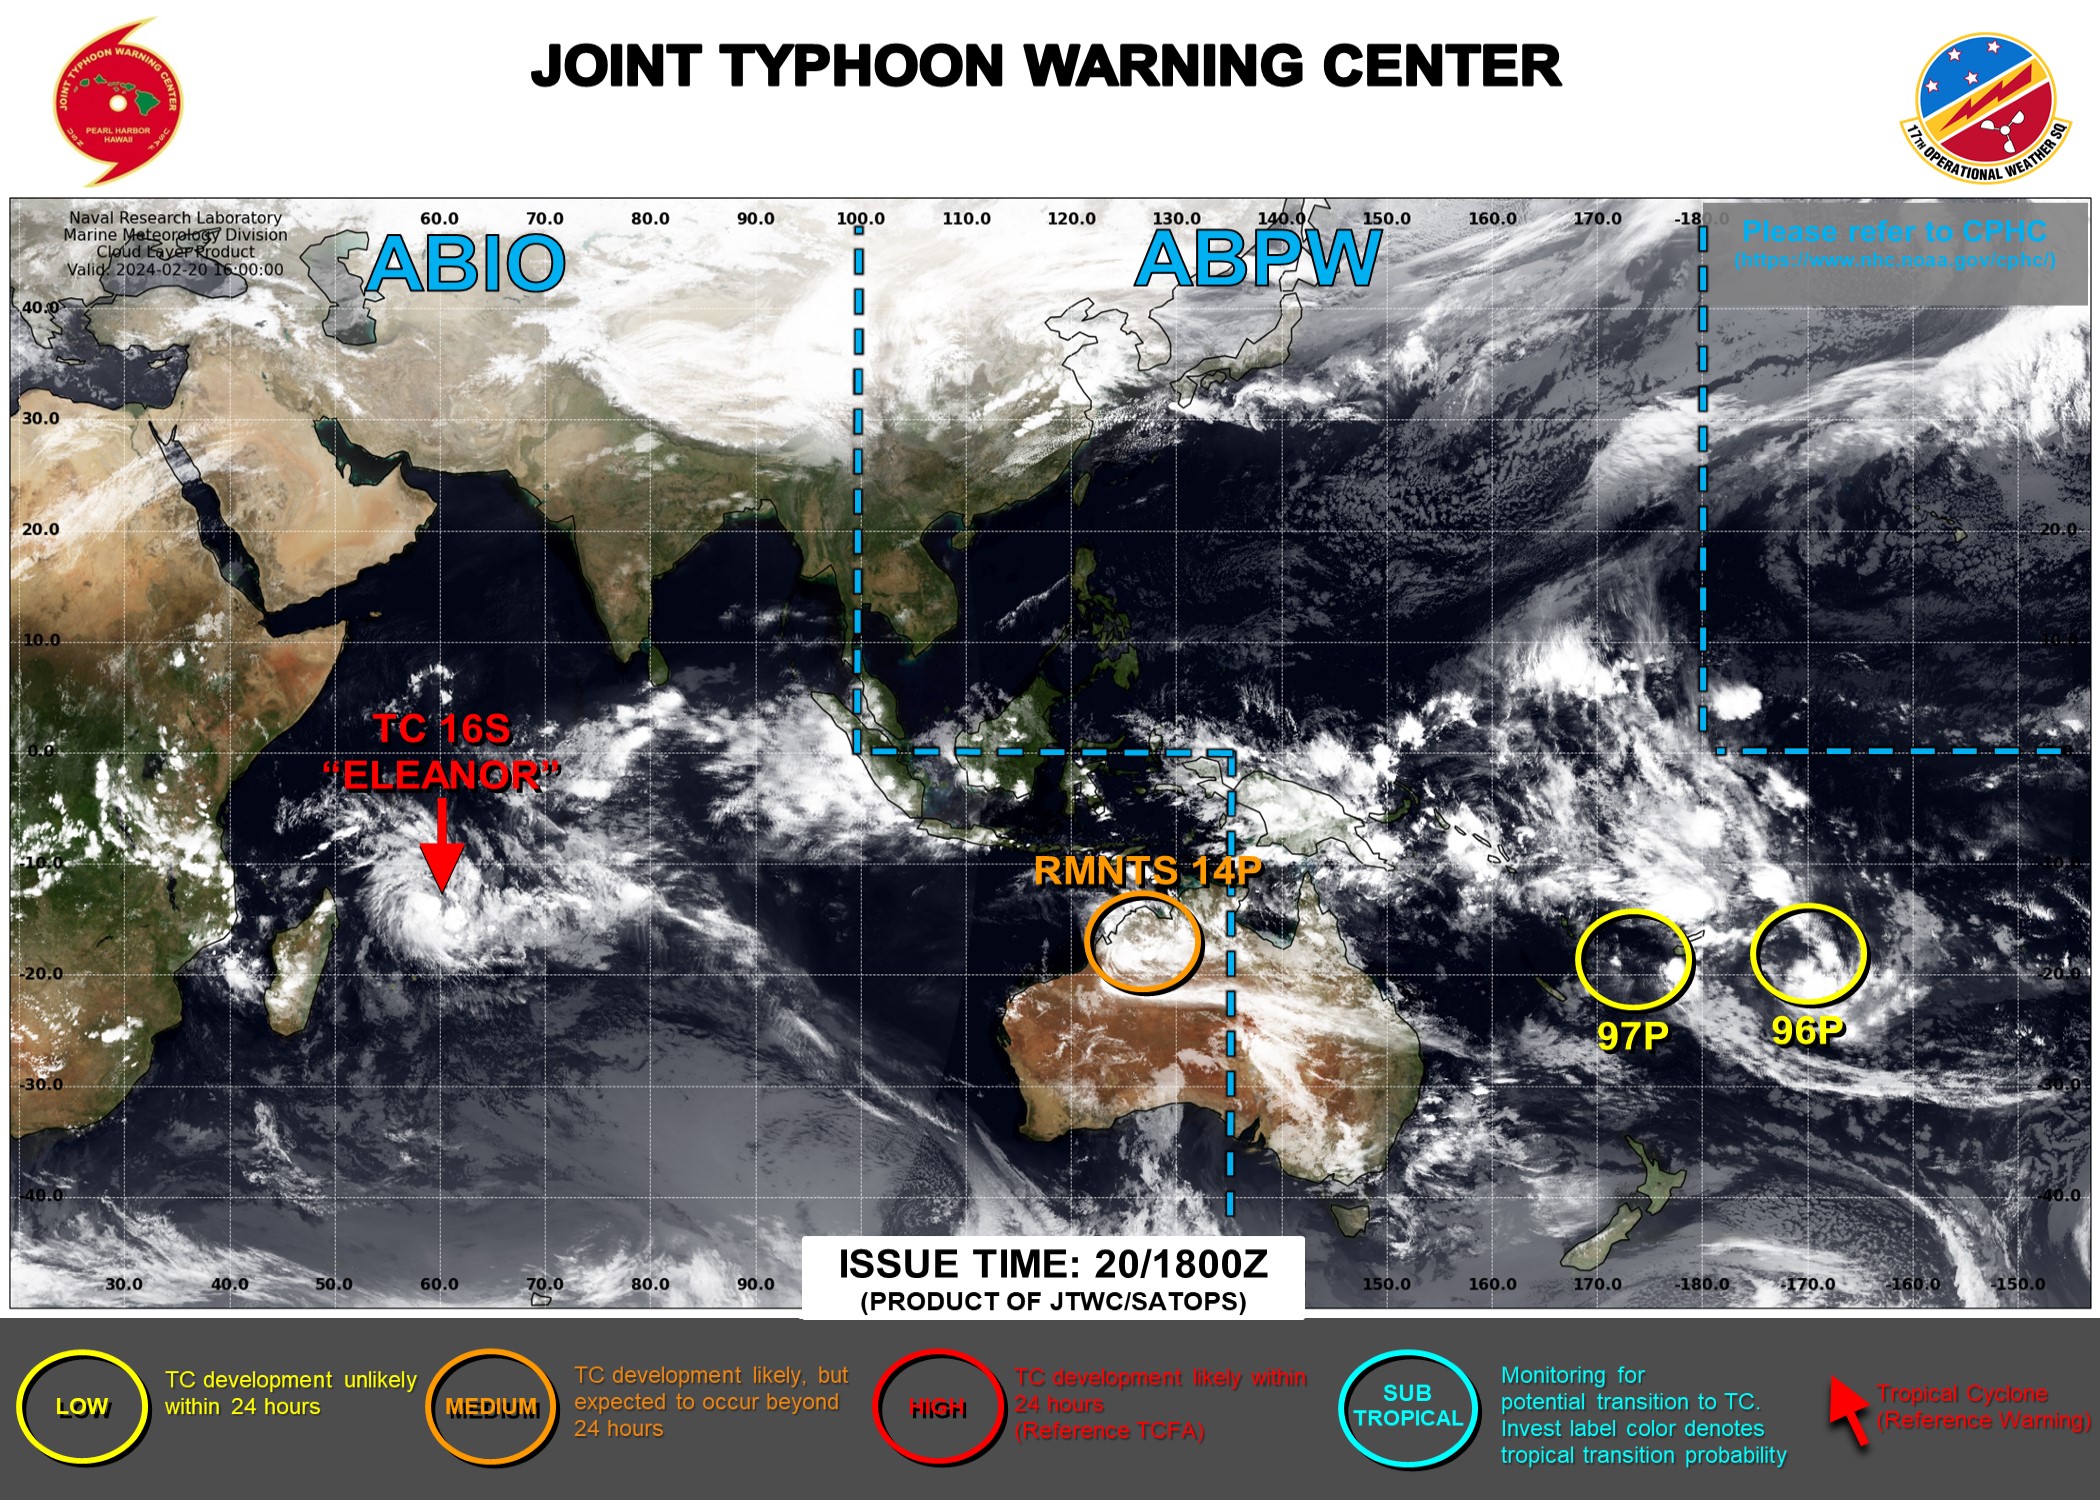 JTWC IS ISSUING 12HOURLY WARNINGS AND 3HOURLY SATELLITE BULLETINS ON TC 16S. 3HOURLY SATELLITE BULLETINS ARE ISSUED ON THE OVERLAND REMNANTS OF TC 14P.